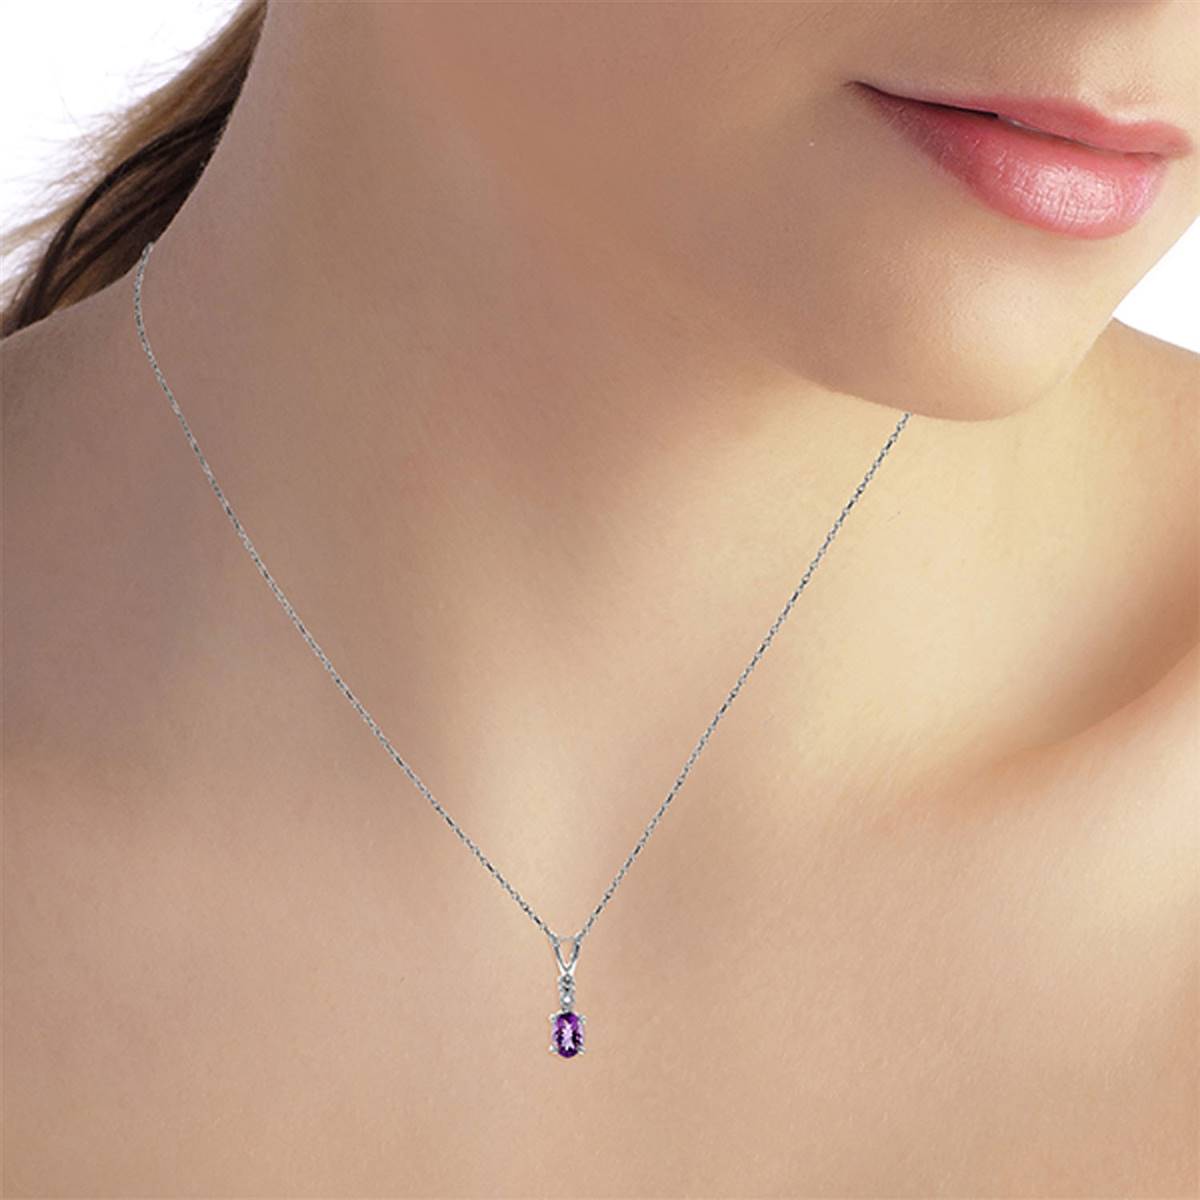 0.46 Carat 14K Solid White Gold Swift Moment Amethyst Diamond Necklace